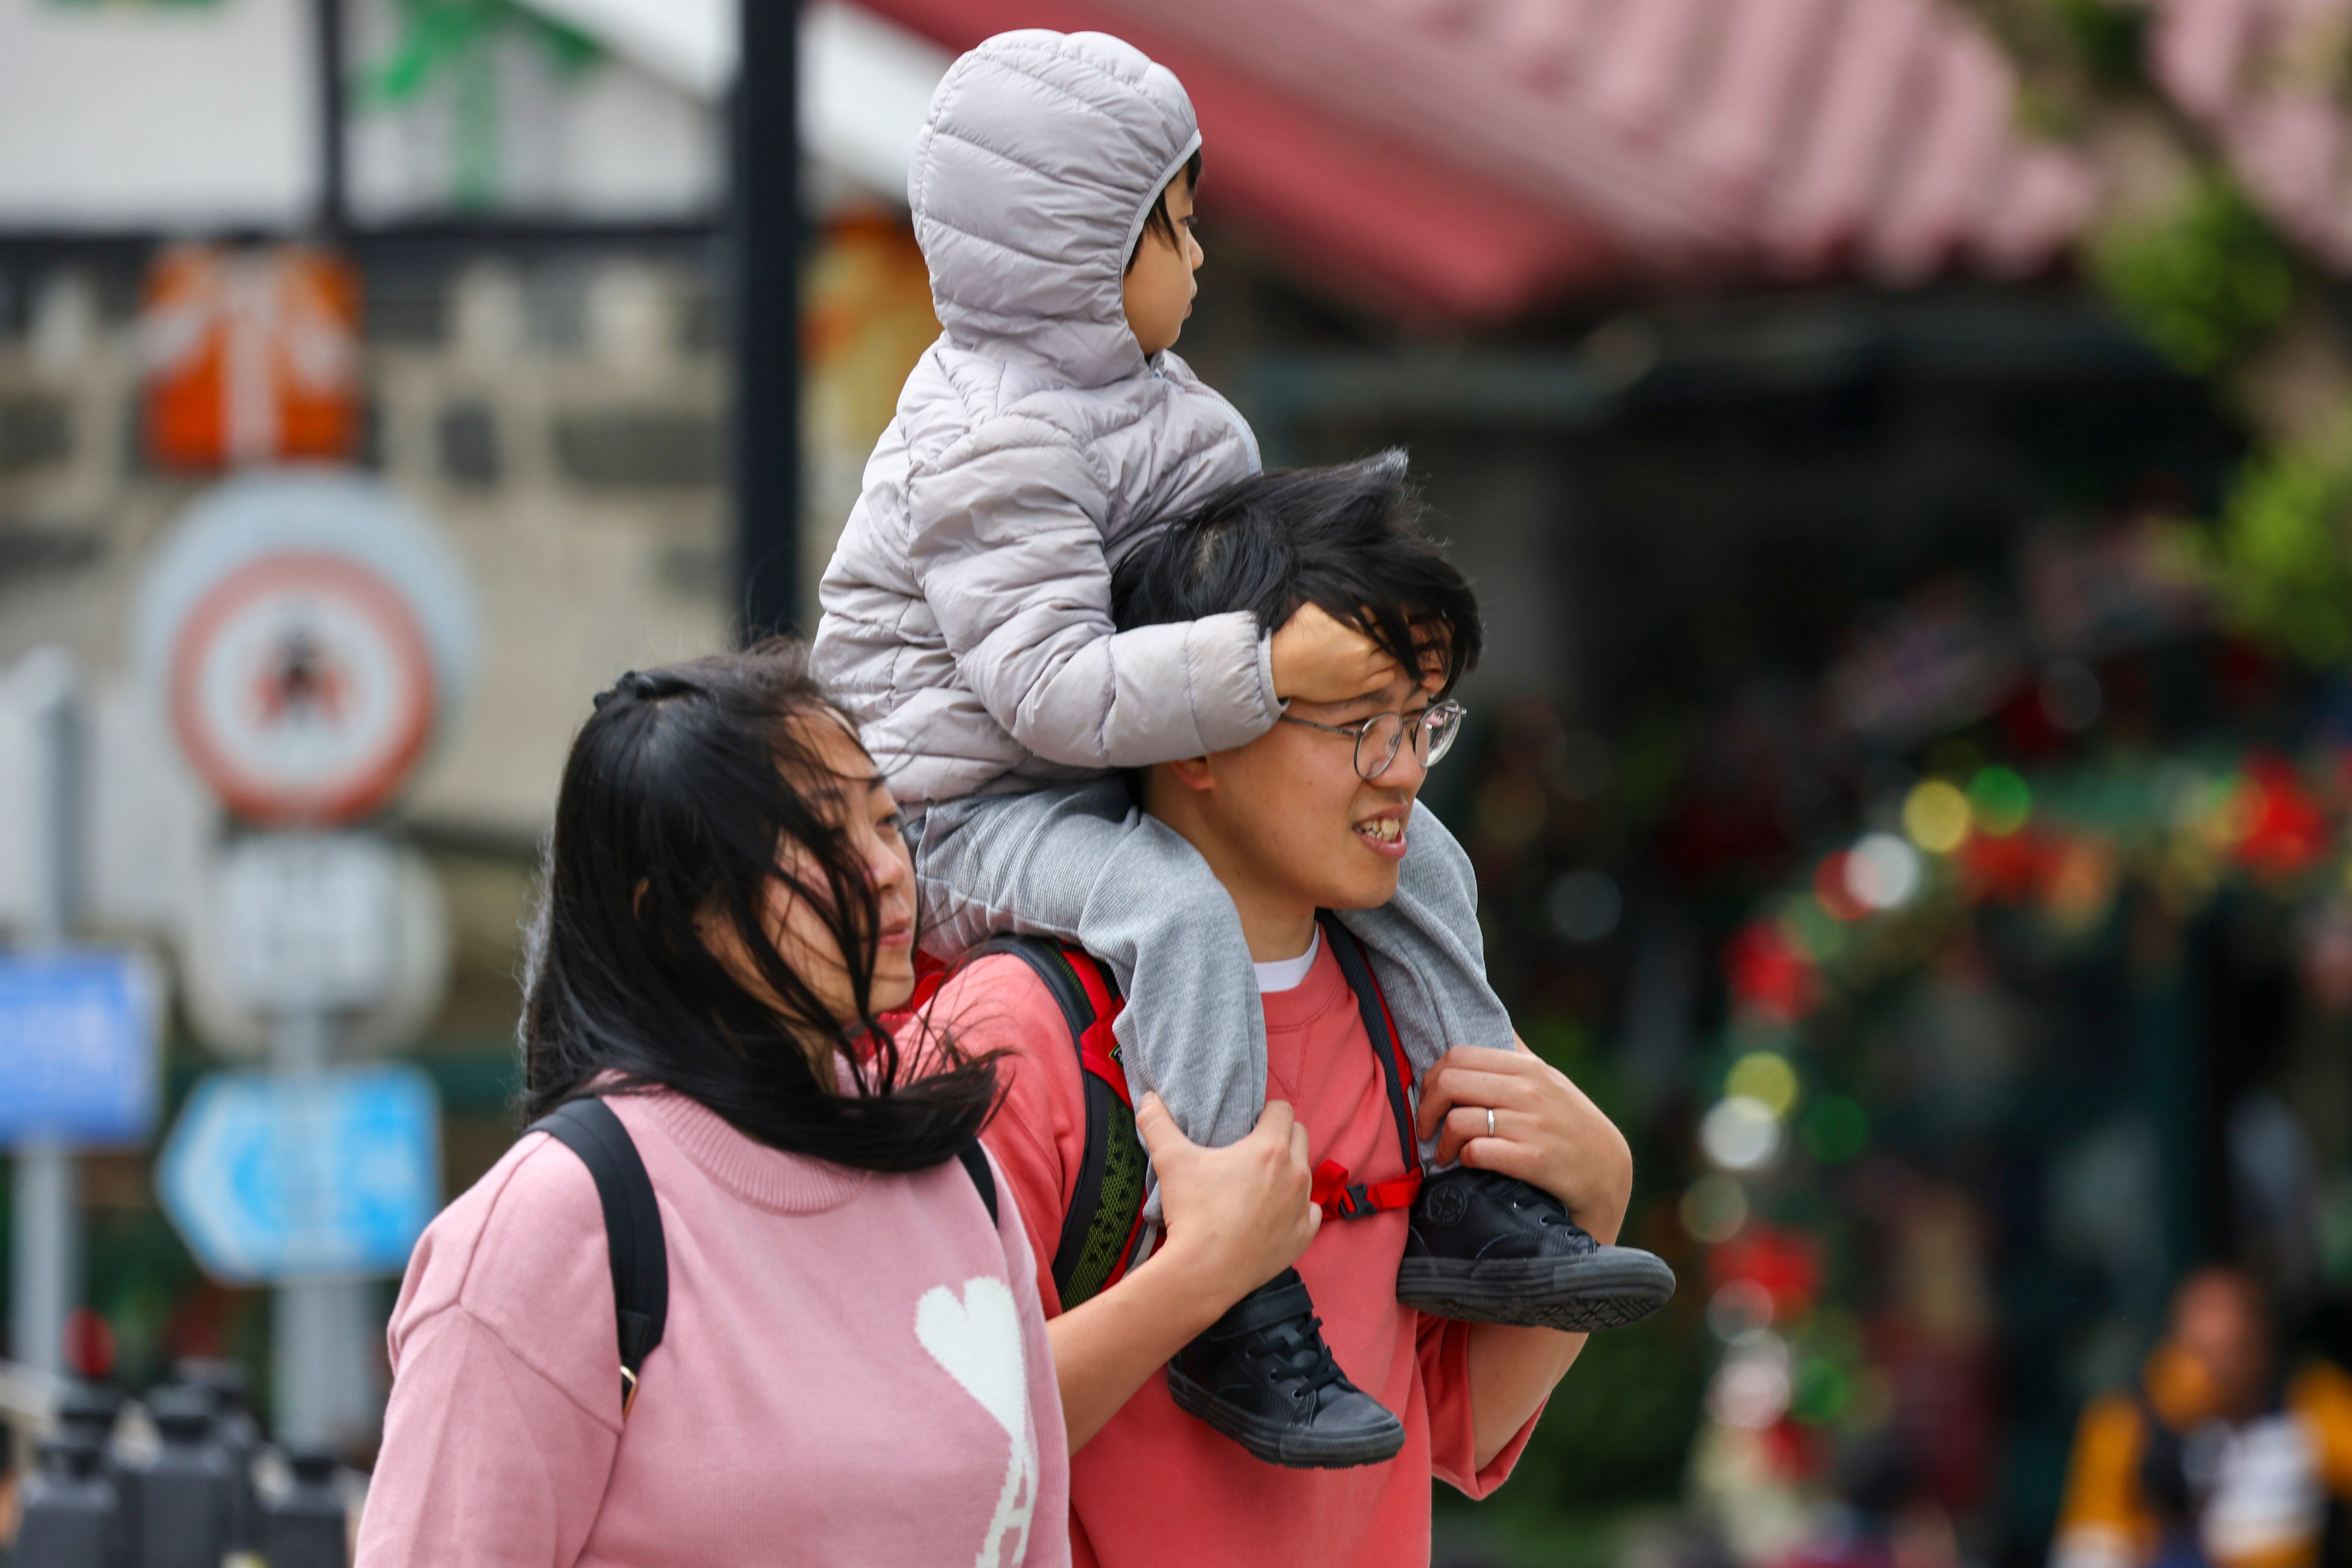 Parents walk with their child at The Peak on December 16. Efforts to make Hong Kong a more family-friendly city have been hampered by resistance to flexible working from employers, budgetary concerns and more. Photo: Dickson Lee